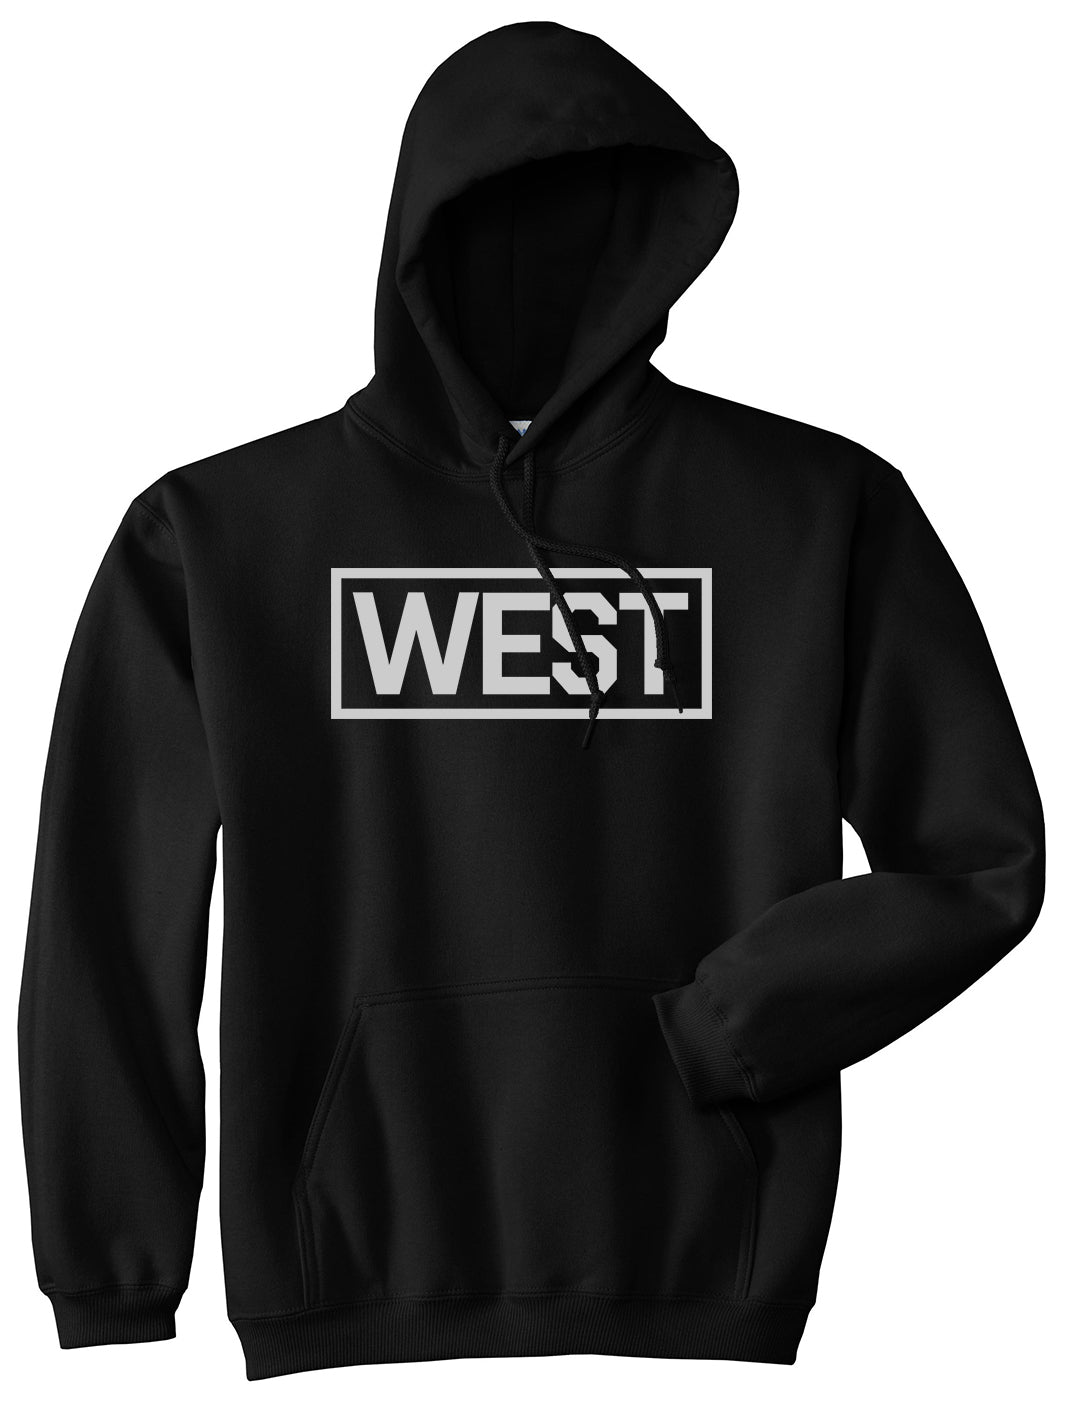 West Box Logo Mens Black Pullover Hoodie by Kings Of NY